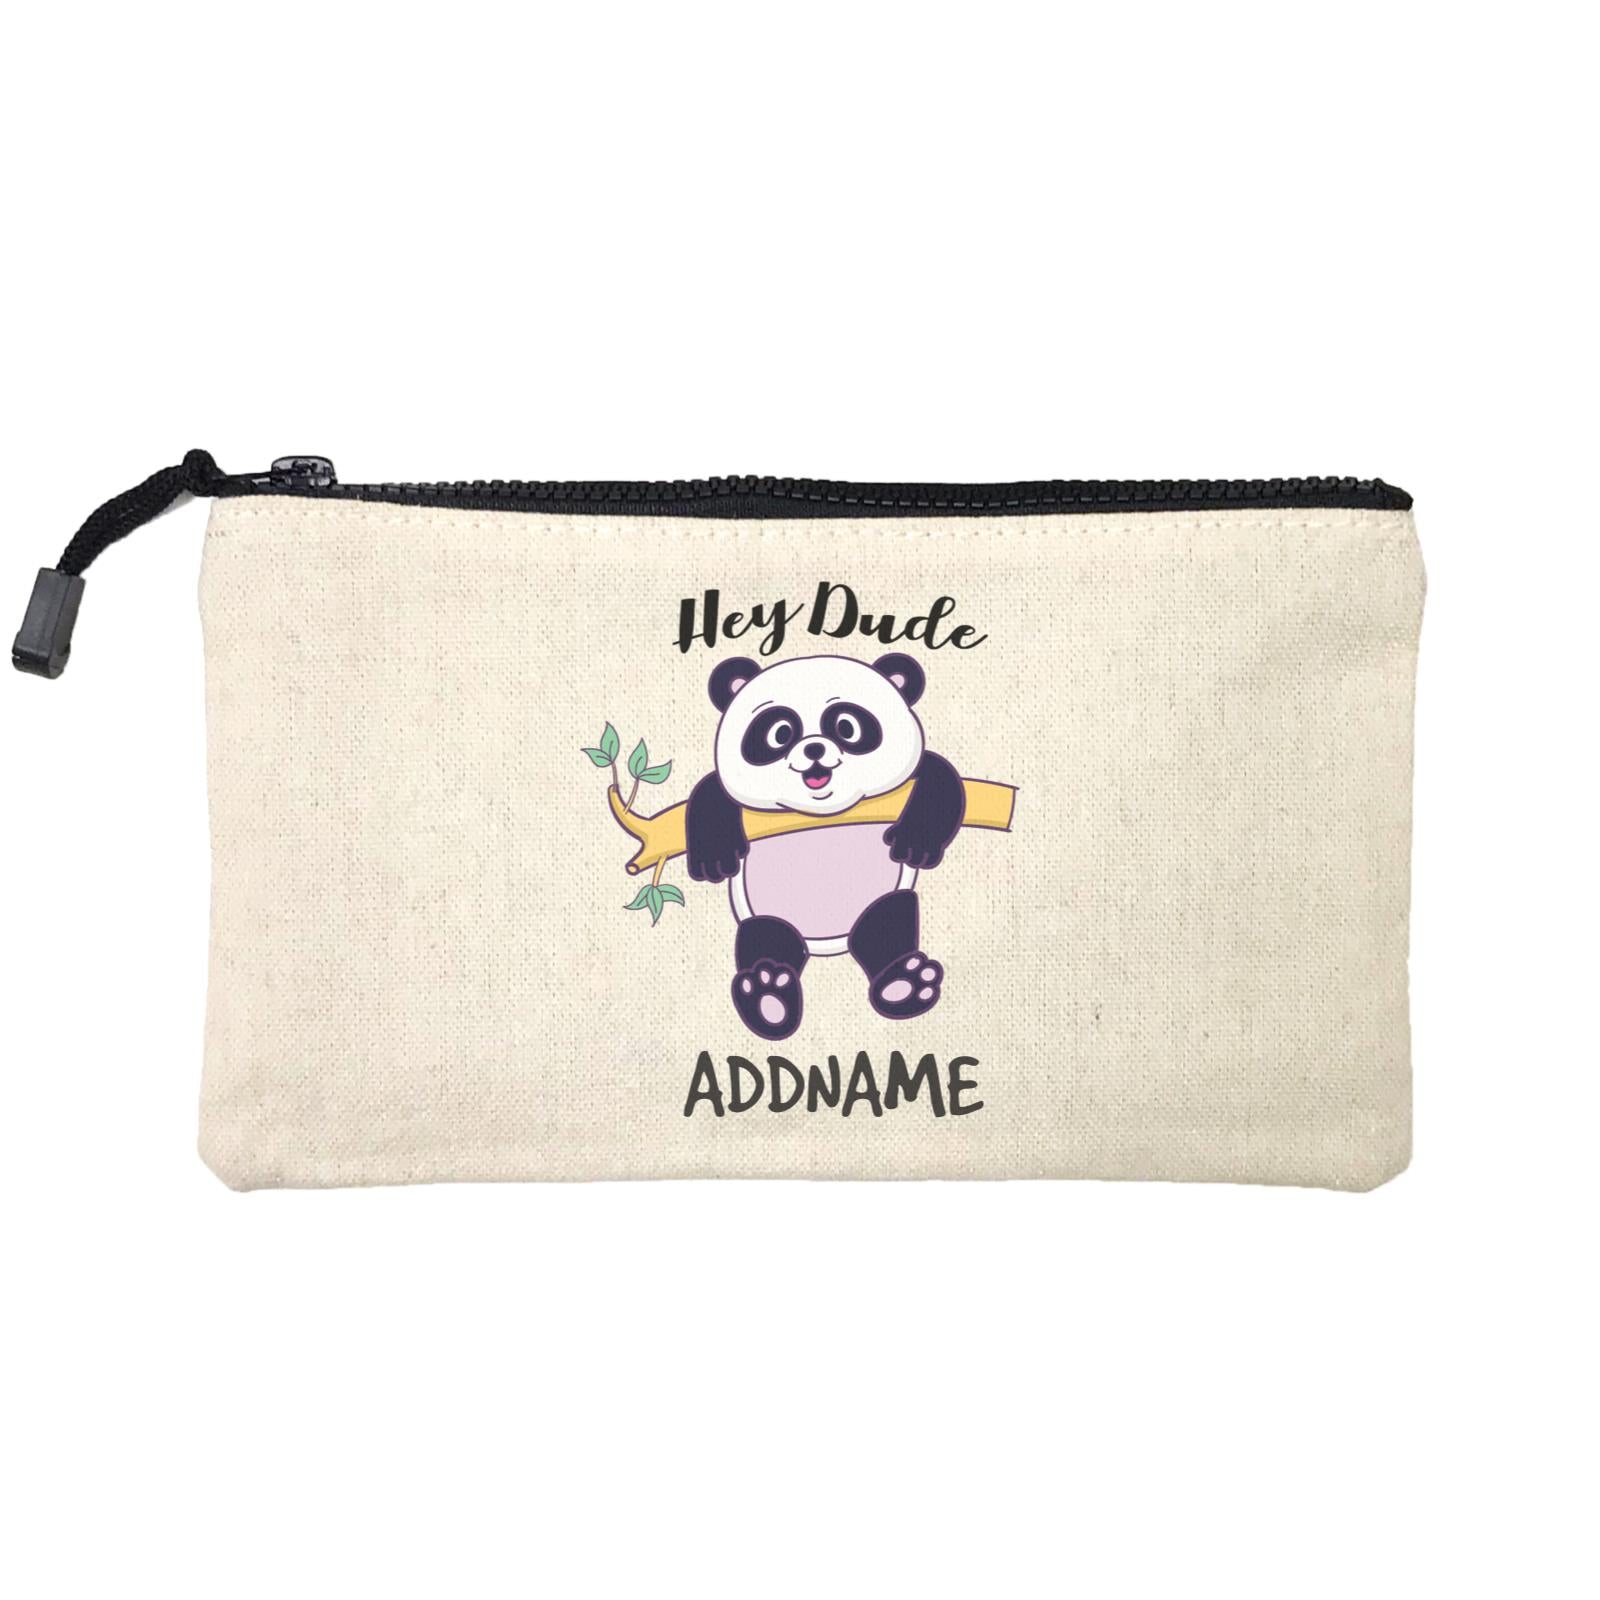 Cool Cute Animals Bear Hey Dude Panda Addname Mini Accessories Stationery Pouch